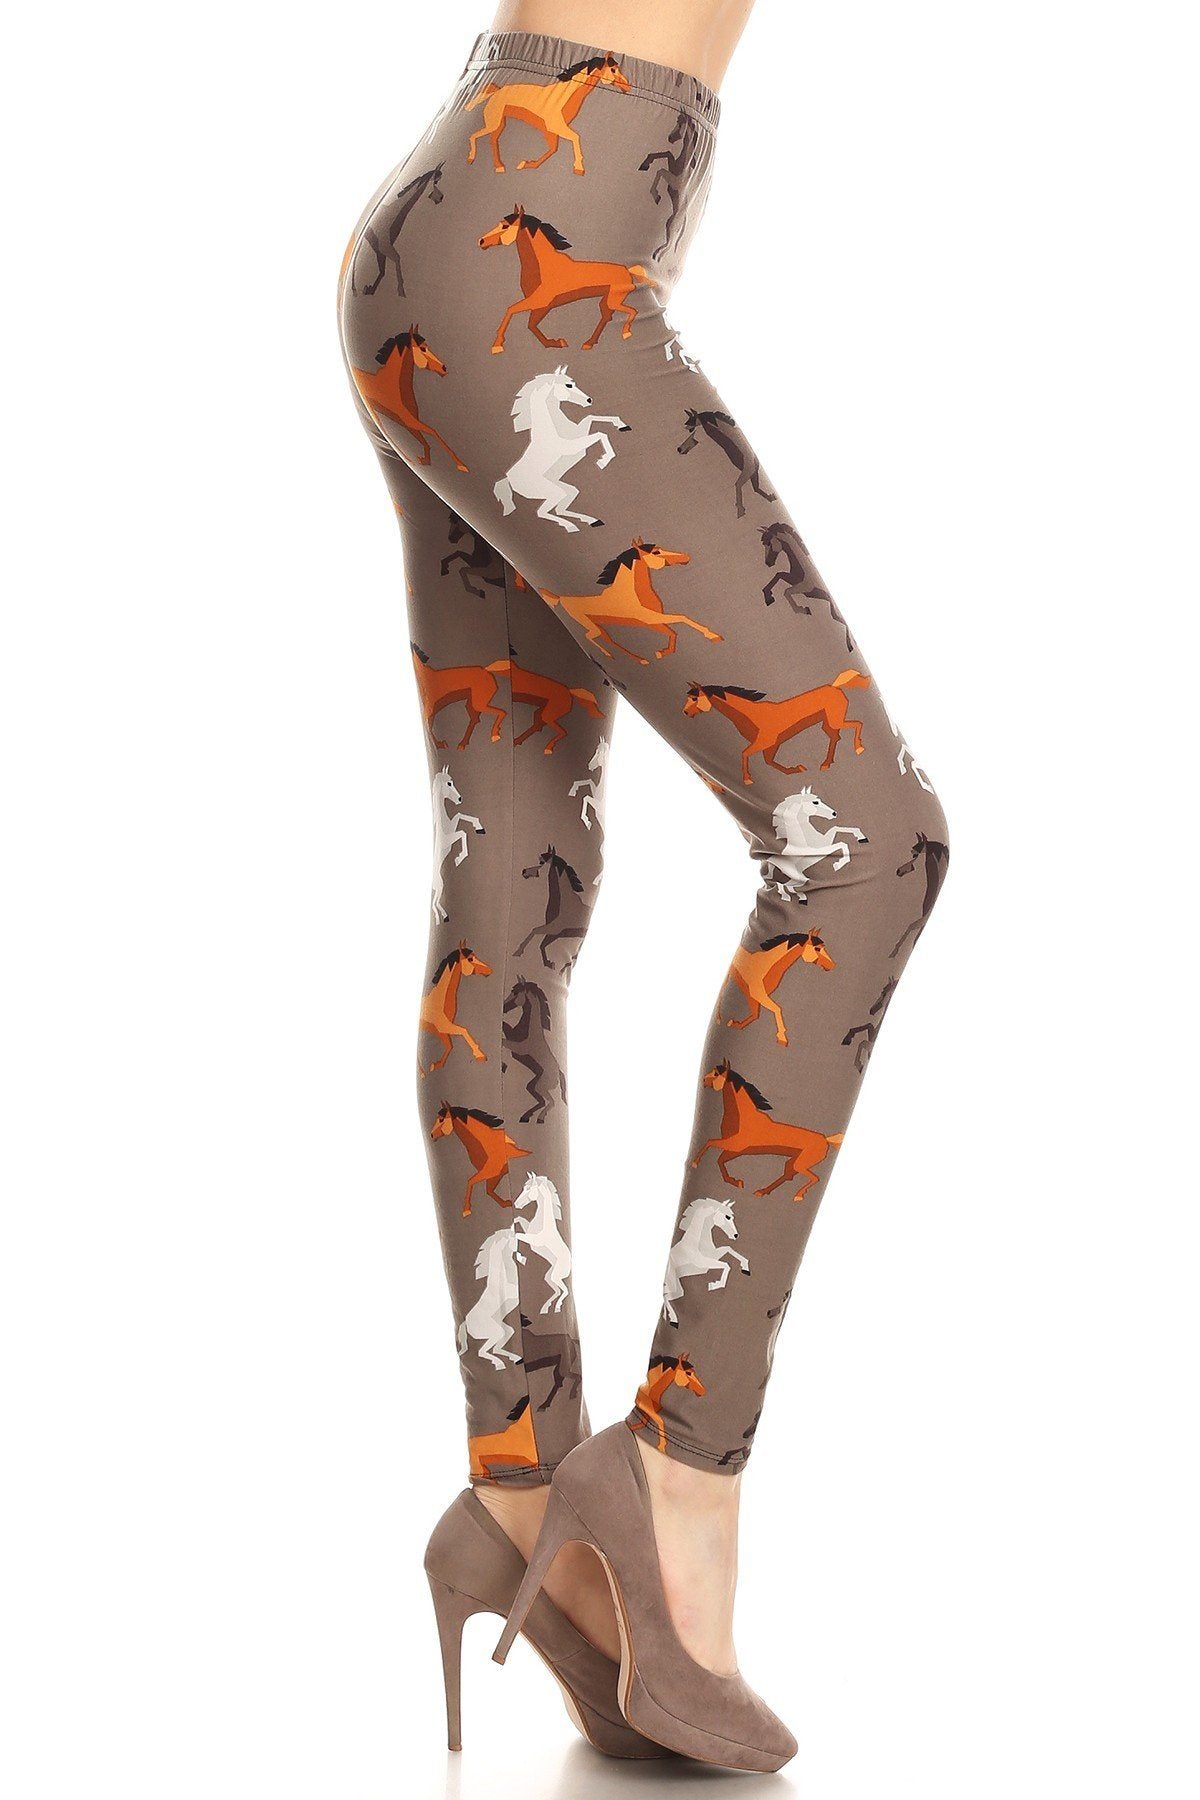 Women's Horse Printed Leggings Gray: OS and Plus Leggings MomMe and More 